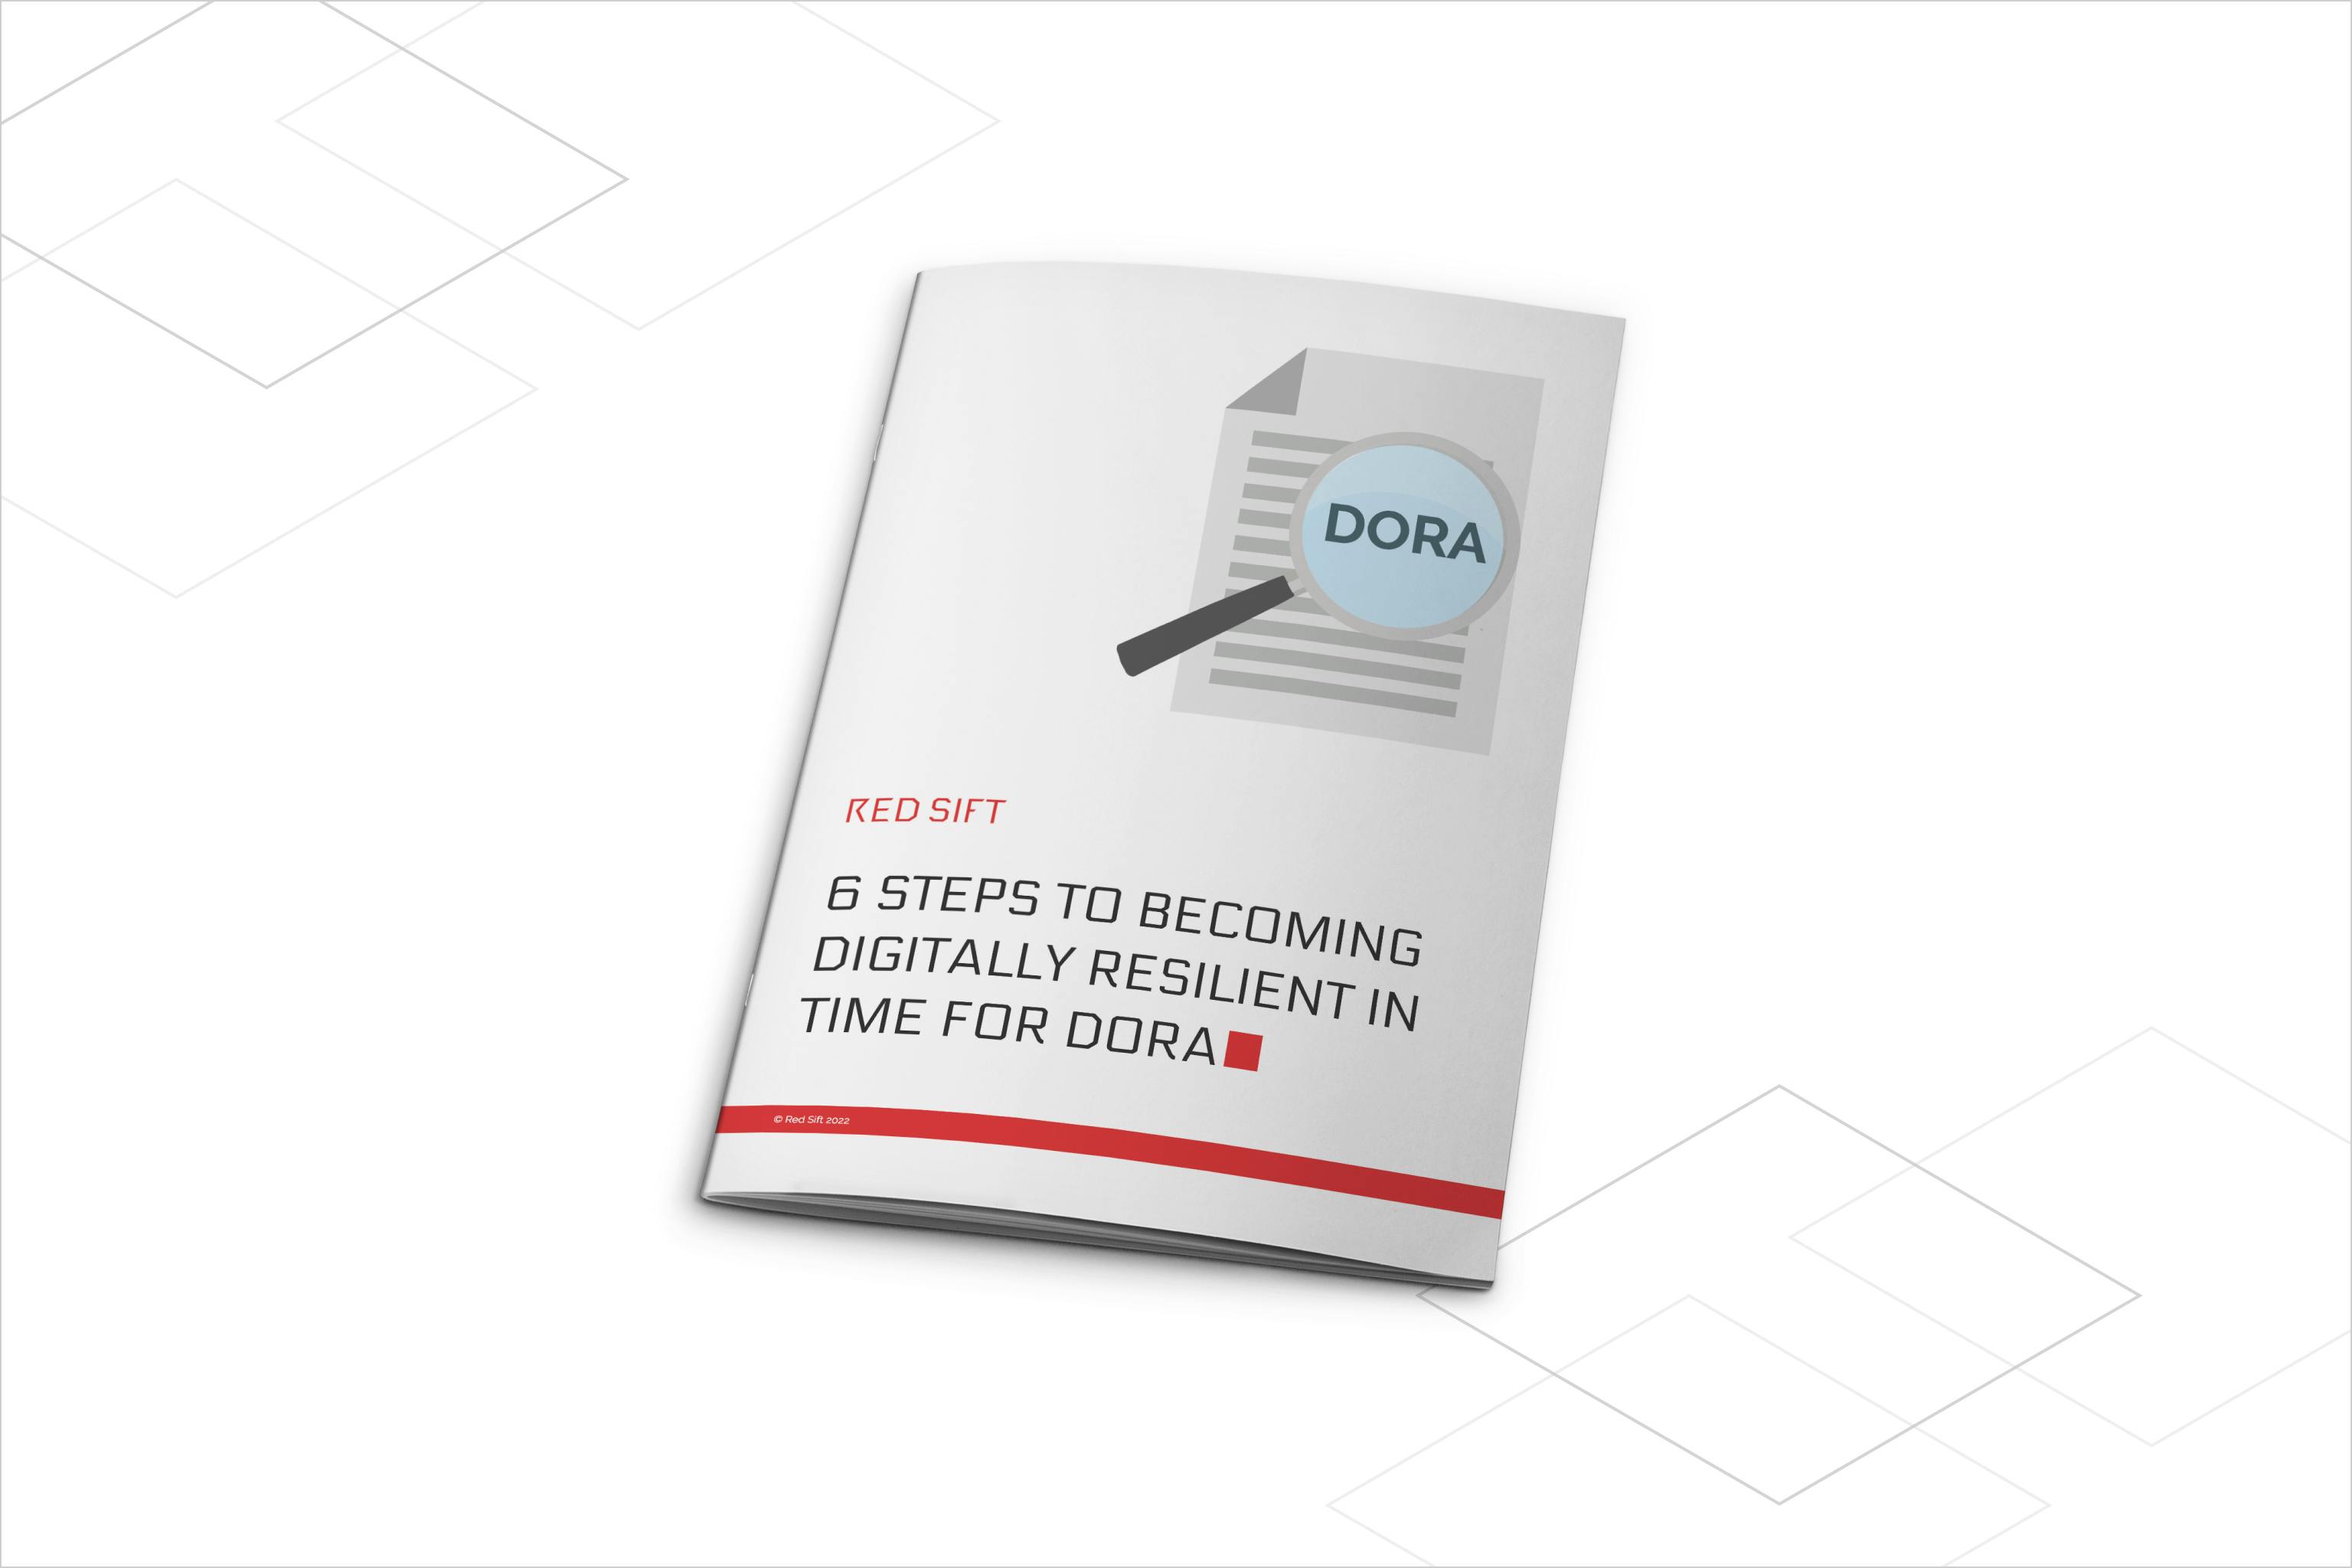 6 steps to becoming digitally resilient in time for DORA